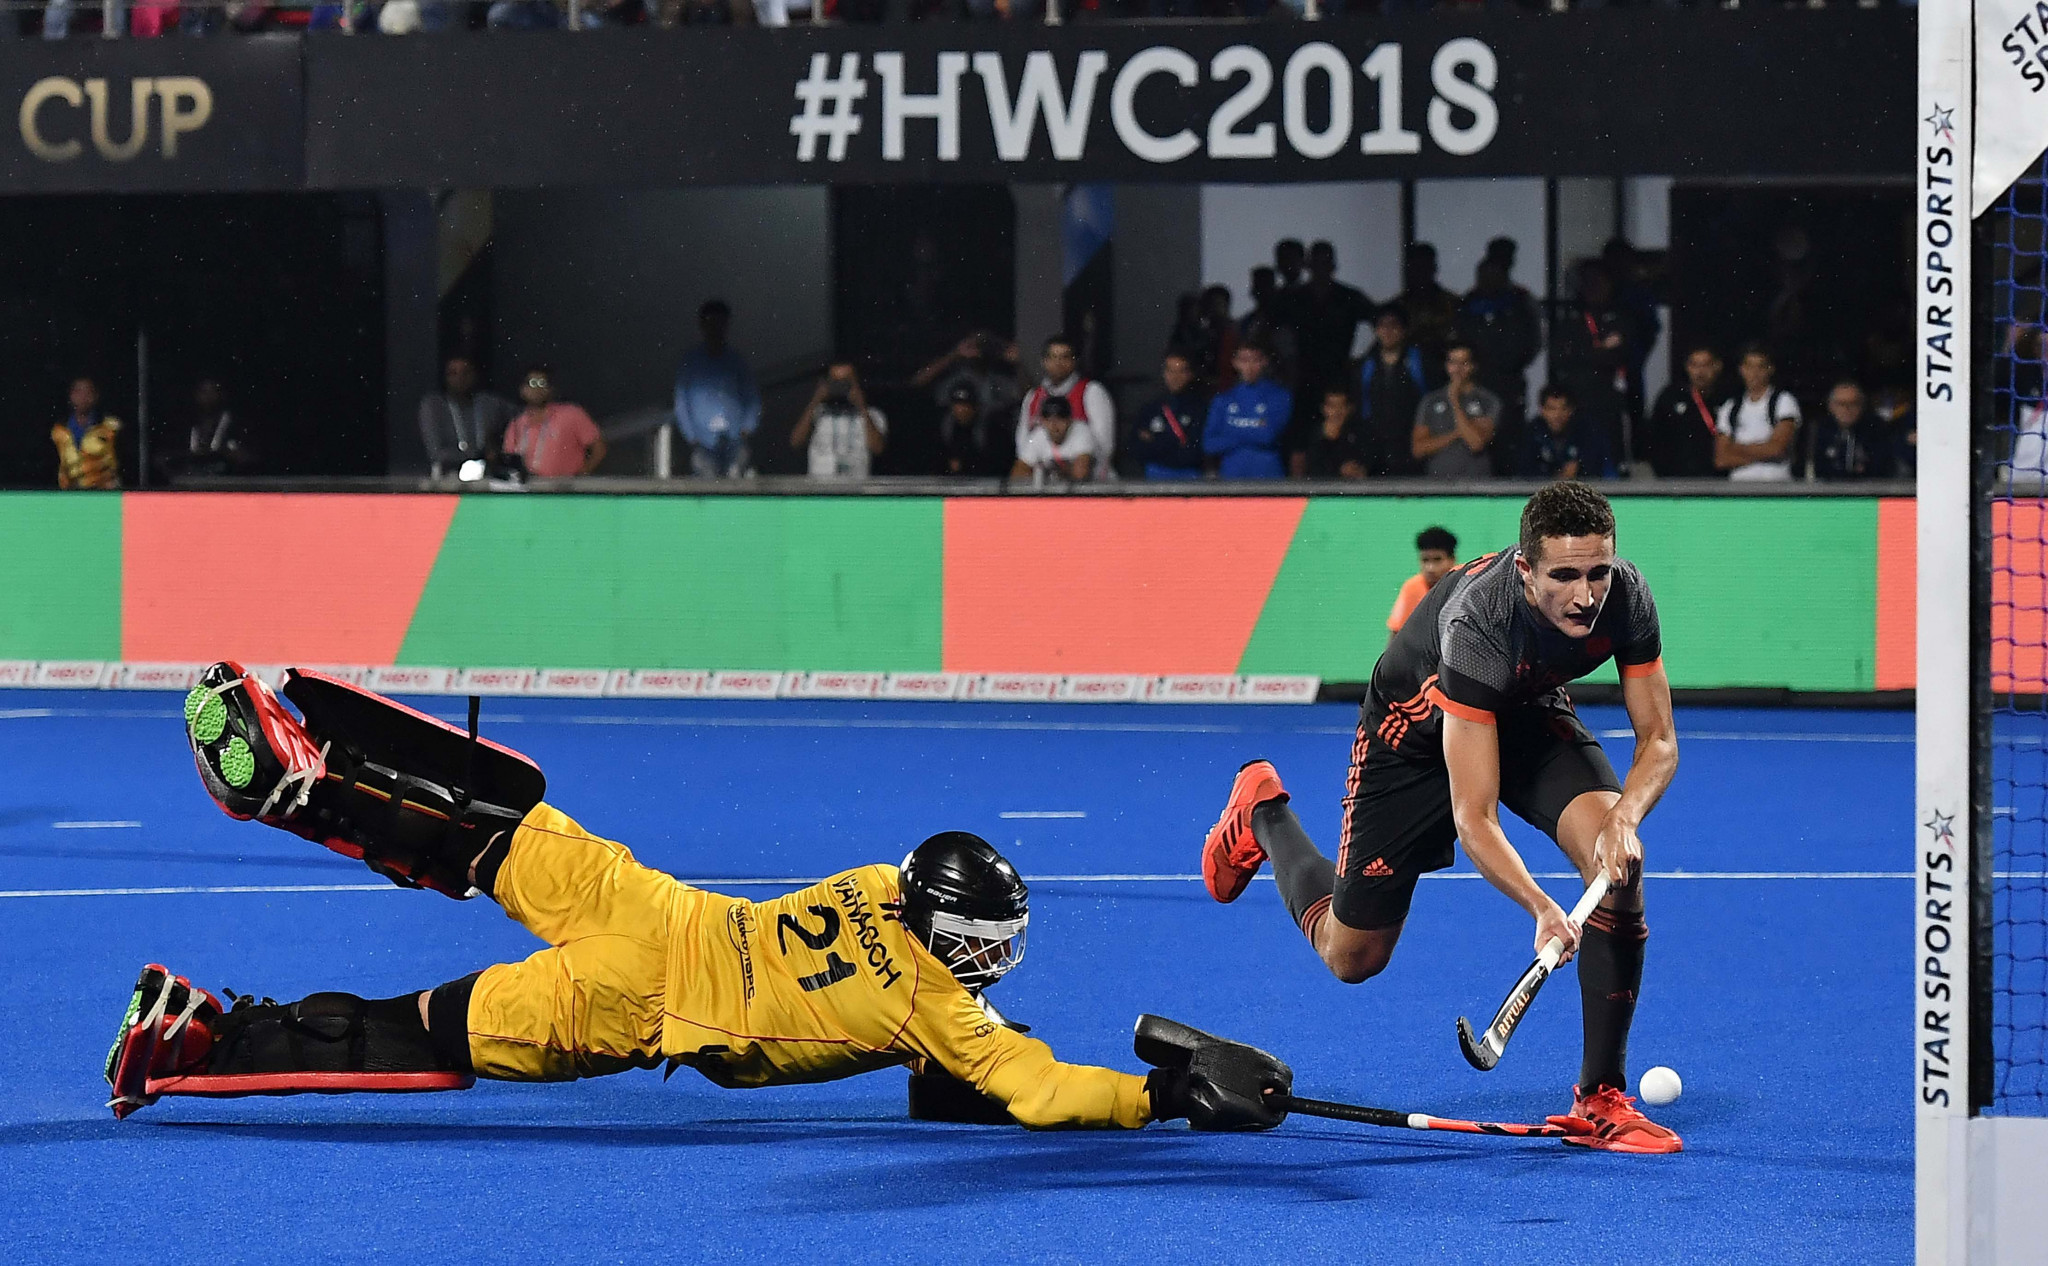 India also hosted the 2018 Men's Hockey World Cup ©Getty Images